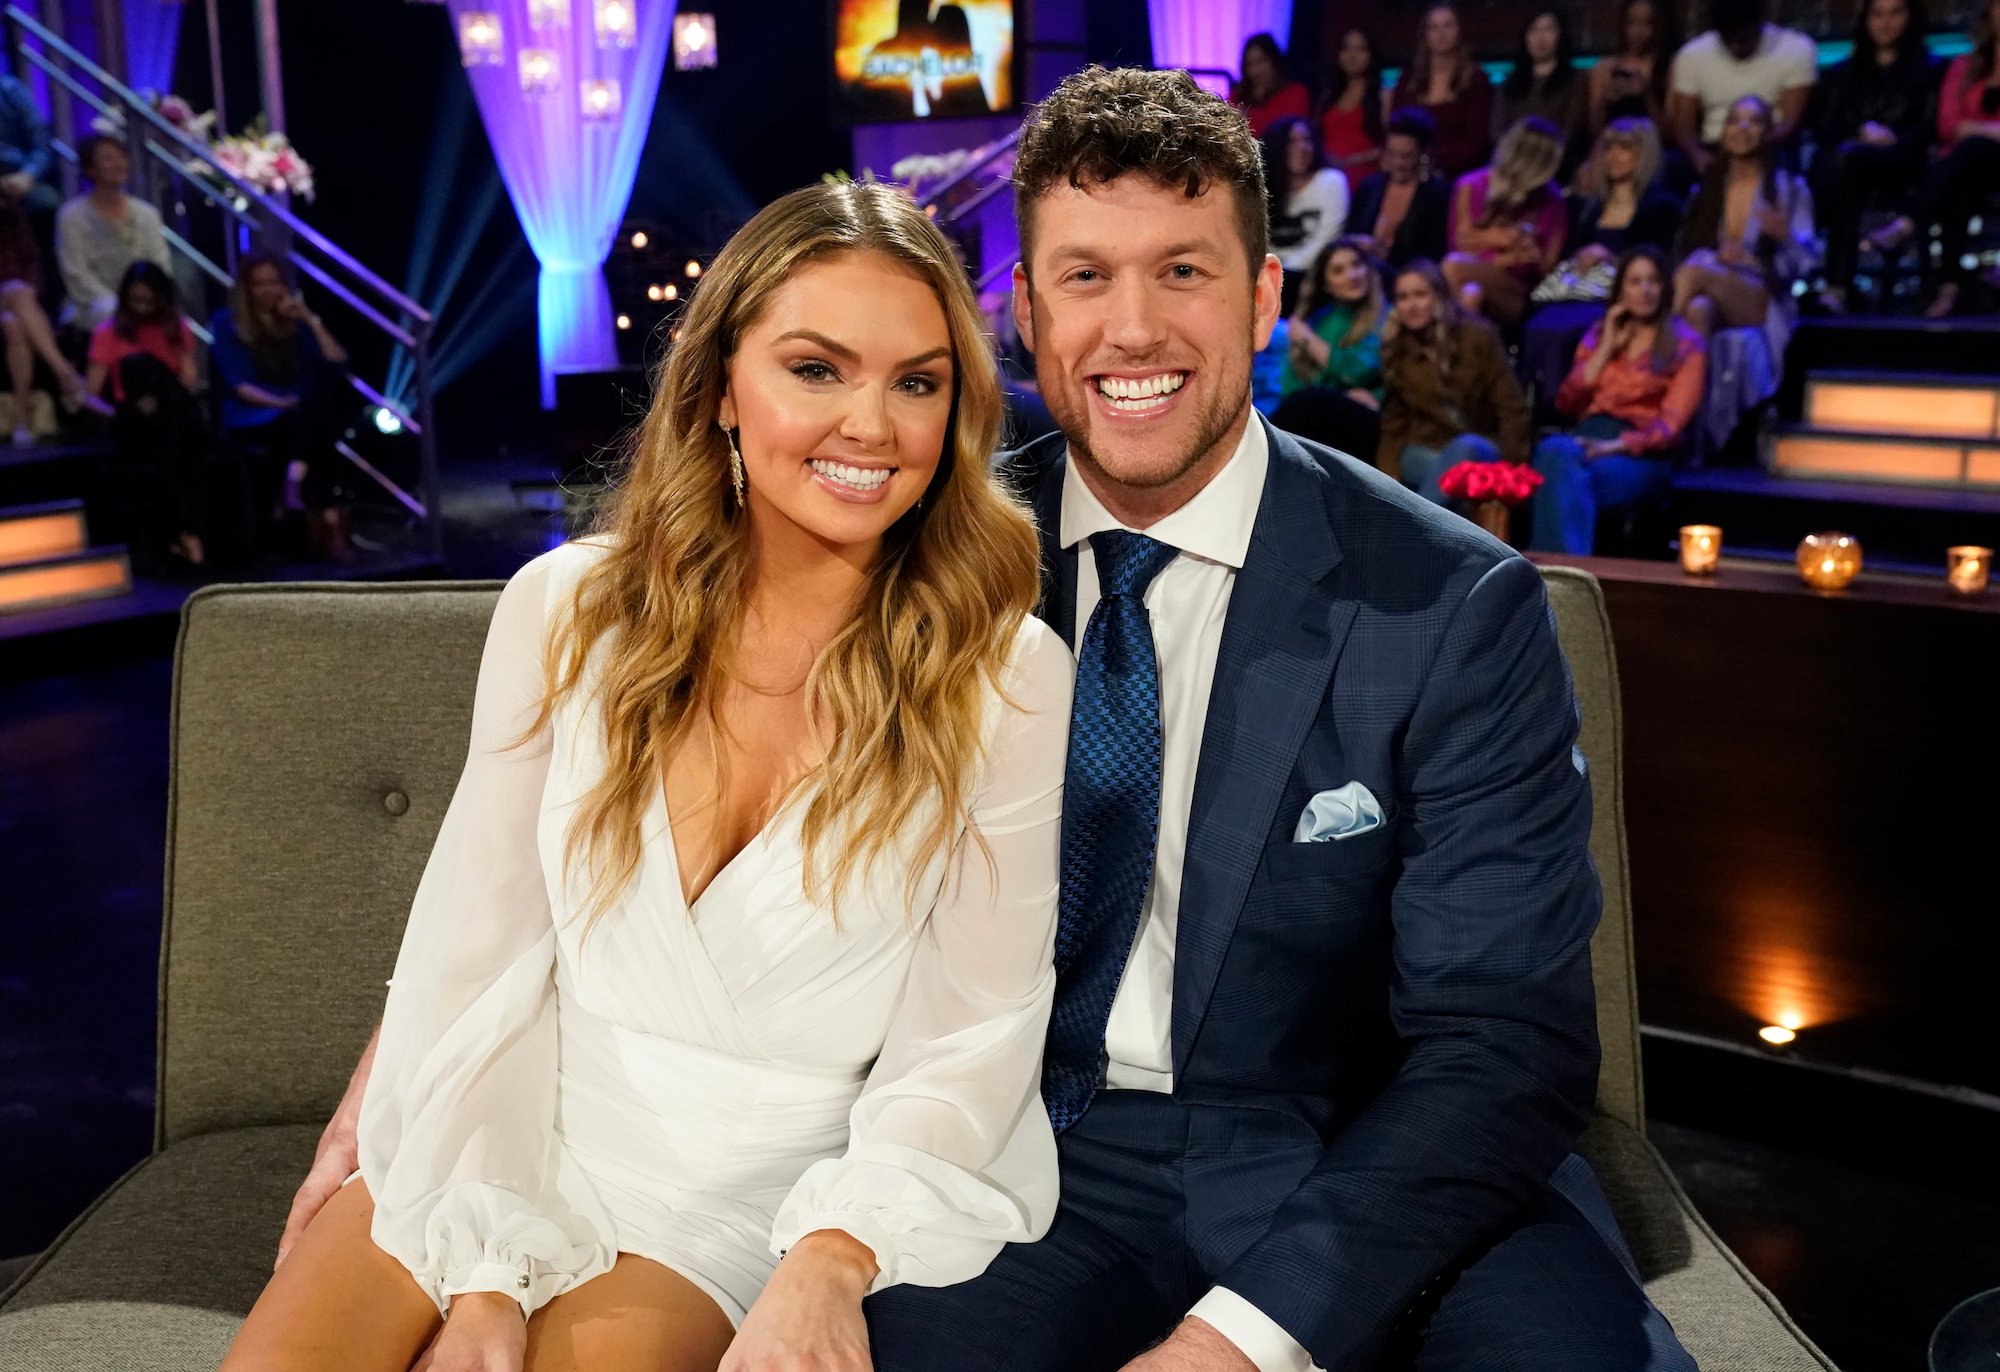 'The Bachelor' couple Susie and Clayton sit next to one another on a couch during the finale.